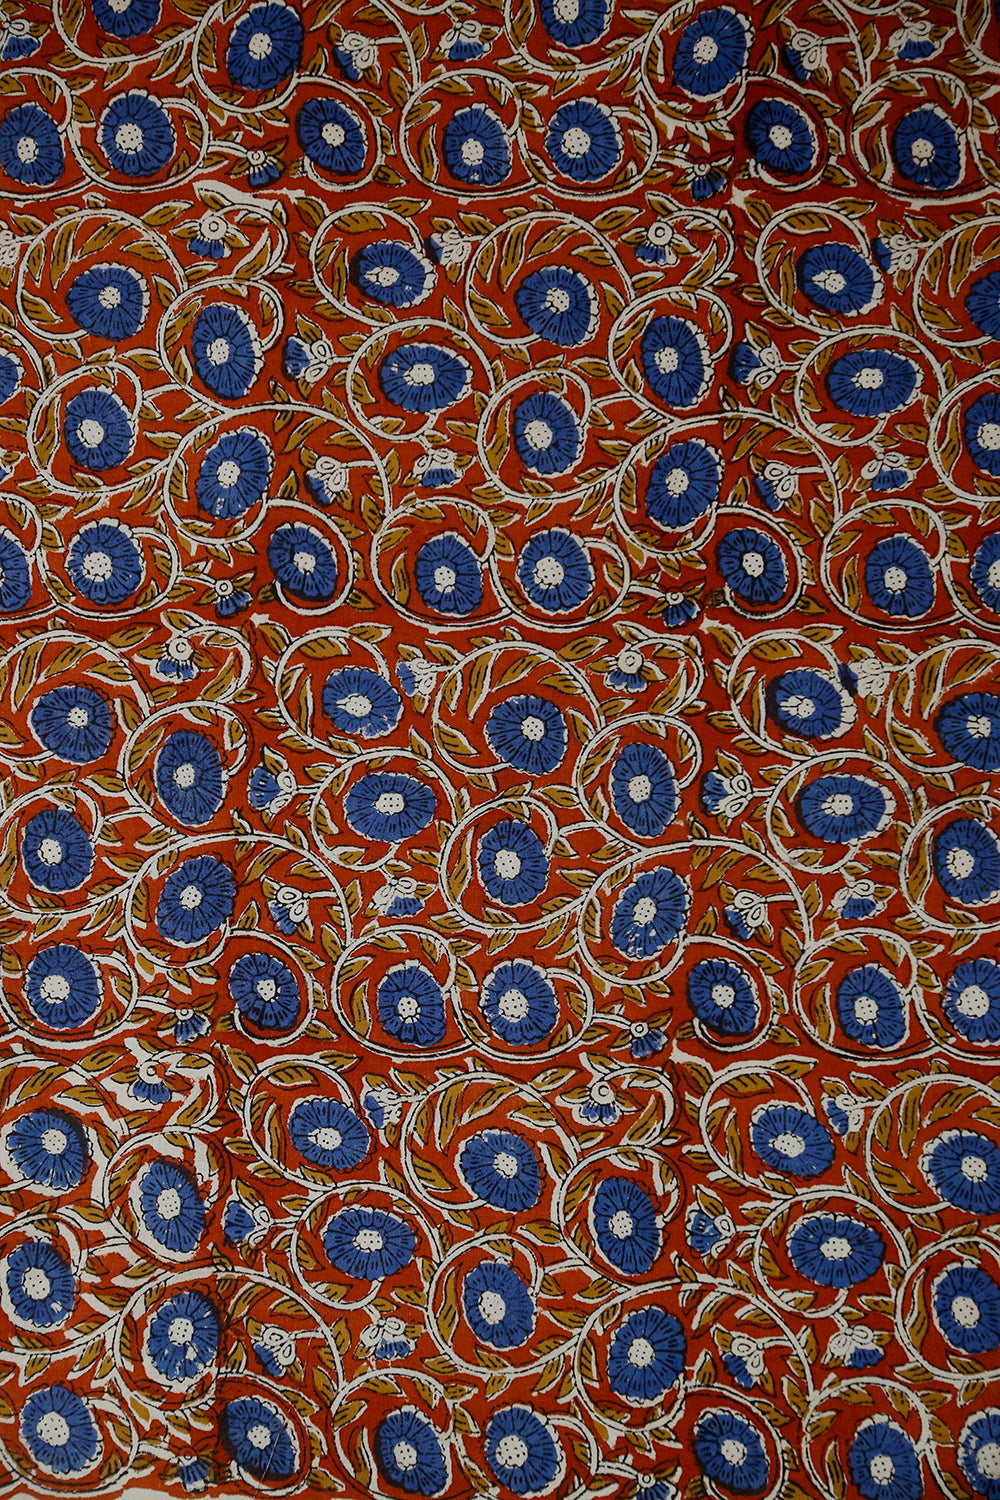 Blue Floral on Maroon Block Printed Cotton Fabric - 0.95m